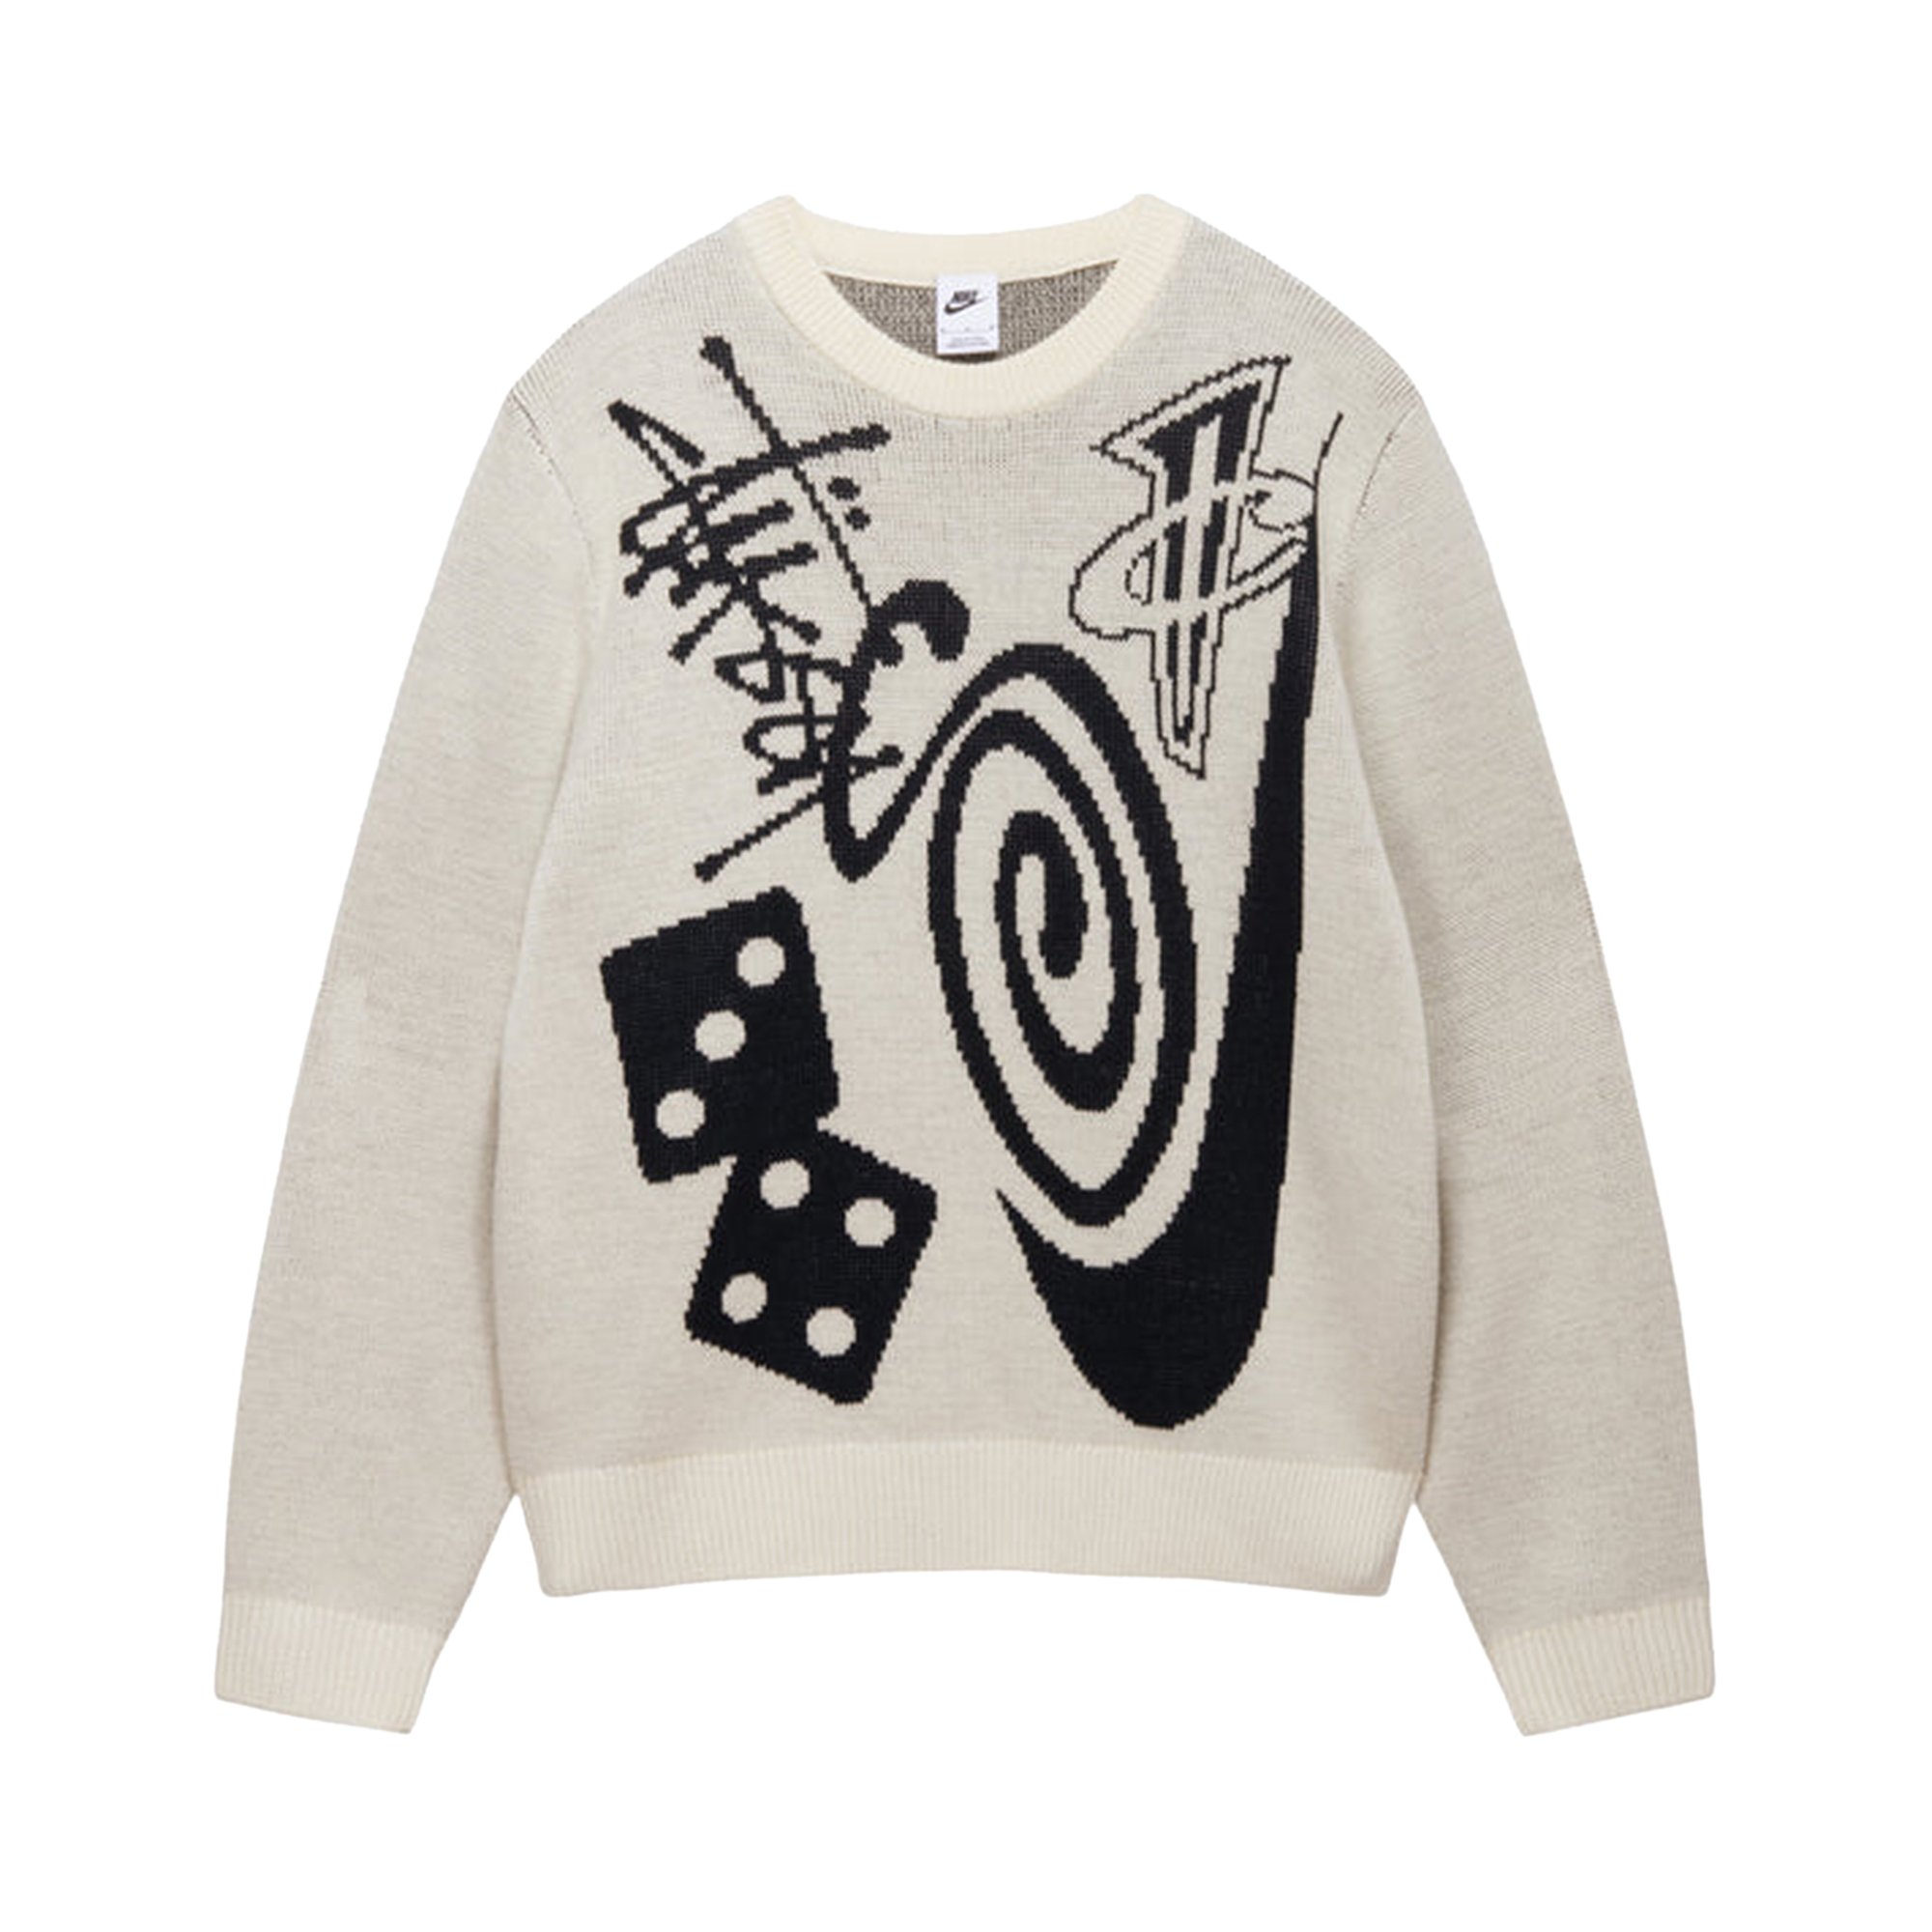 22aw stussy curly s sweater XL natural | nate-hospital.com